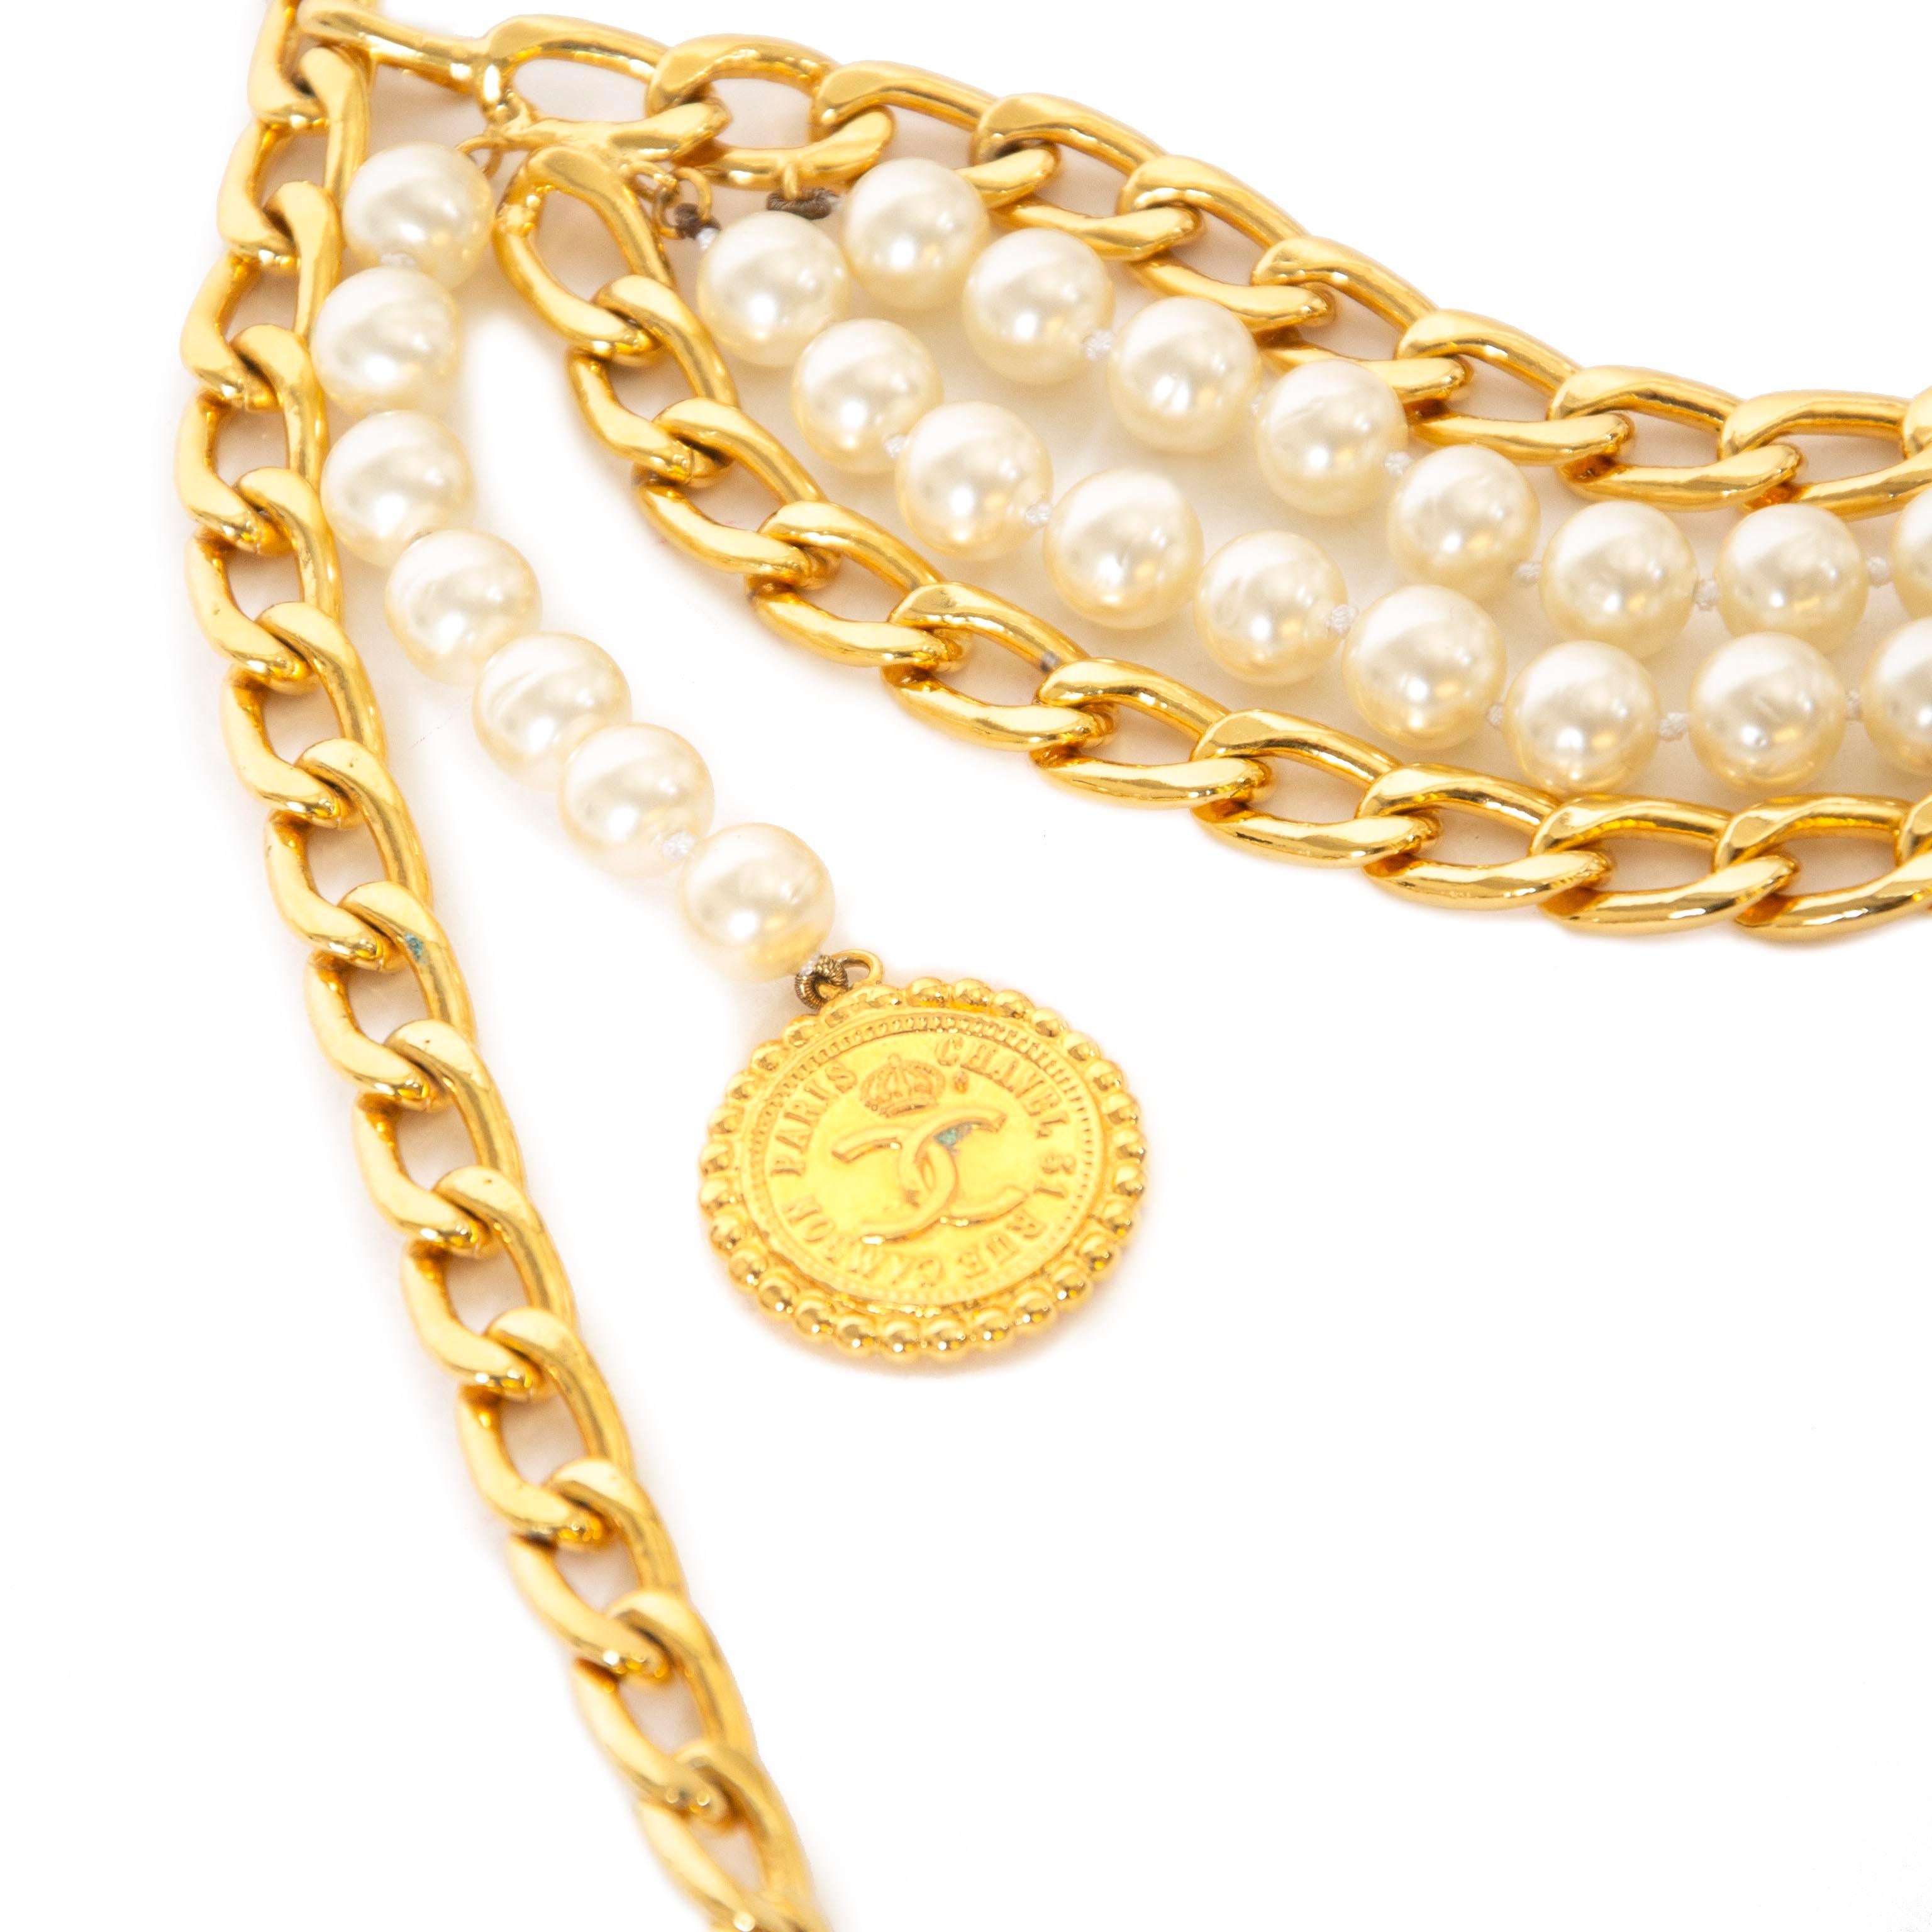 Very good condition

Rare Vintage Chanel Pearl Tassel Chain Belt

Make a statement everywhere you go with this rare Chanel belt!
The belt features gold-toned chains, pearls and a tassel. It also has a gold-toned coin with Chanel 'CC' logo.

Comes